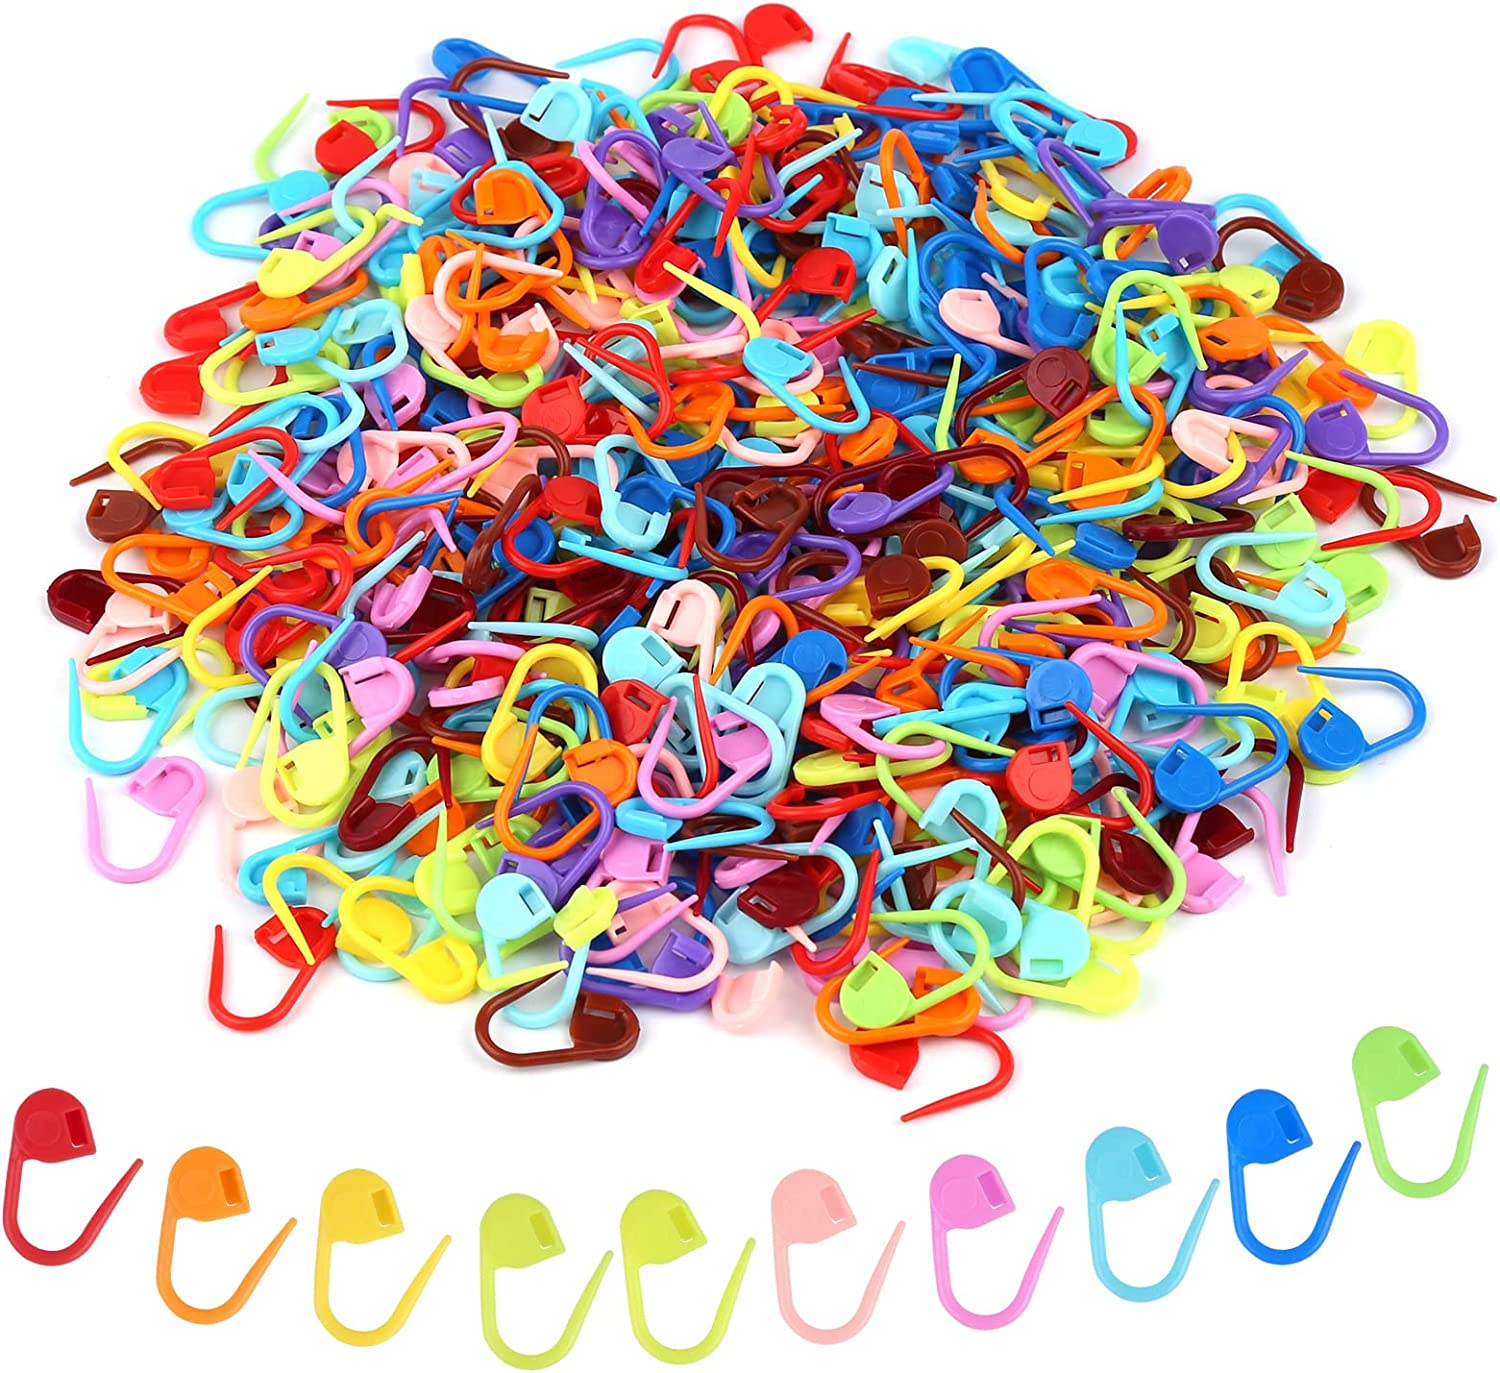 400 PCS Crochet Stitch Markers, Colorful Locking Stitch Markers Plastic Crochet  Stitch Counters Crochet Clips for Weaving, Sewing and Knitting DIY Craft 